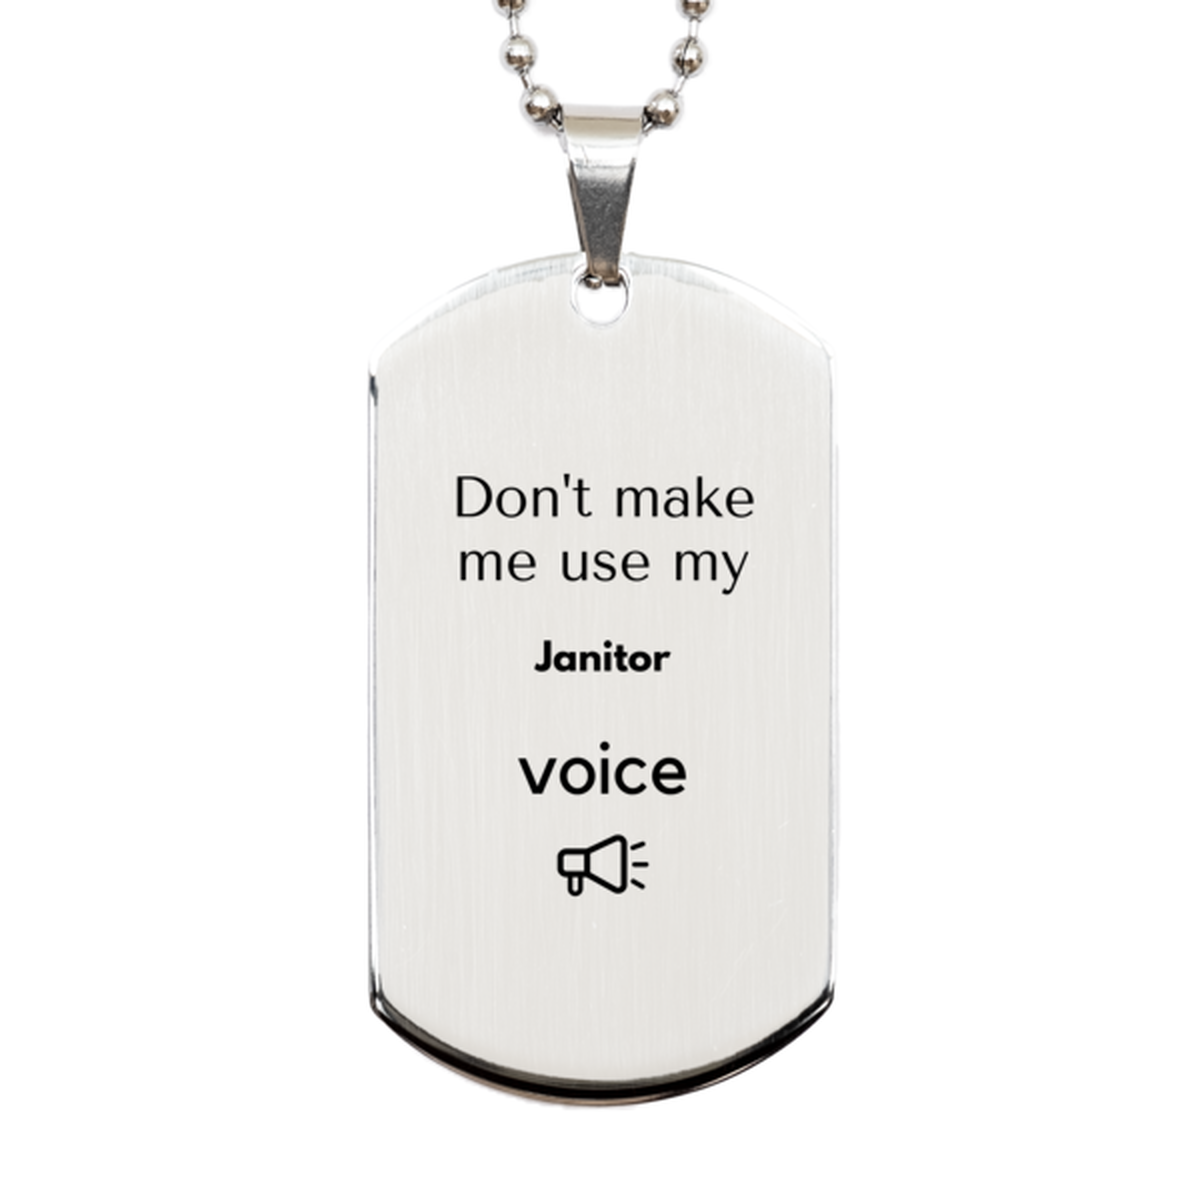 Don't make me use my Janitor voice, Sarcasm Janitor Gifts, Christmas Janitor Silver Dog Tag Birthday Unique Gifts For Janitor Coworkers, Men, Women, Colleague, Friends